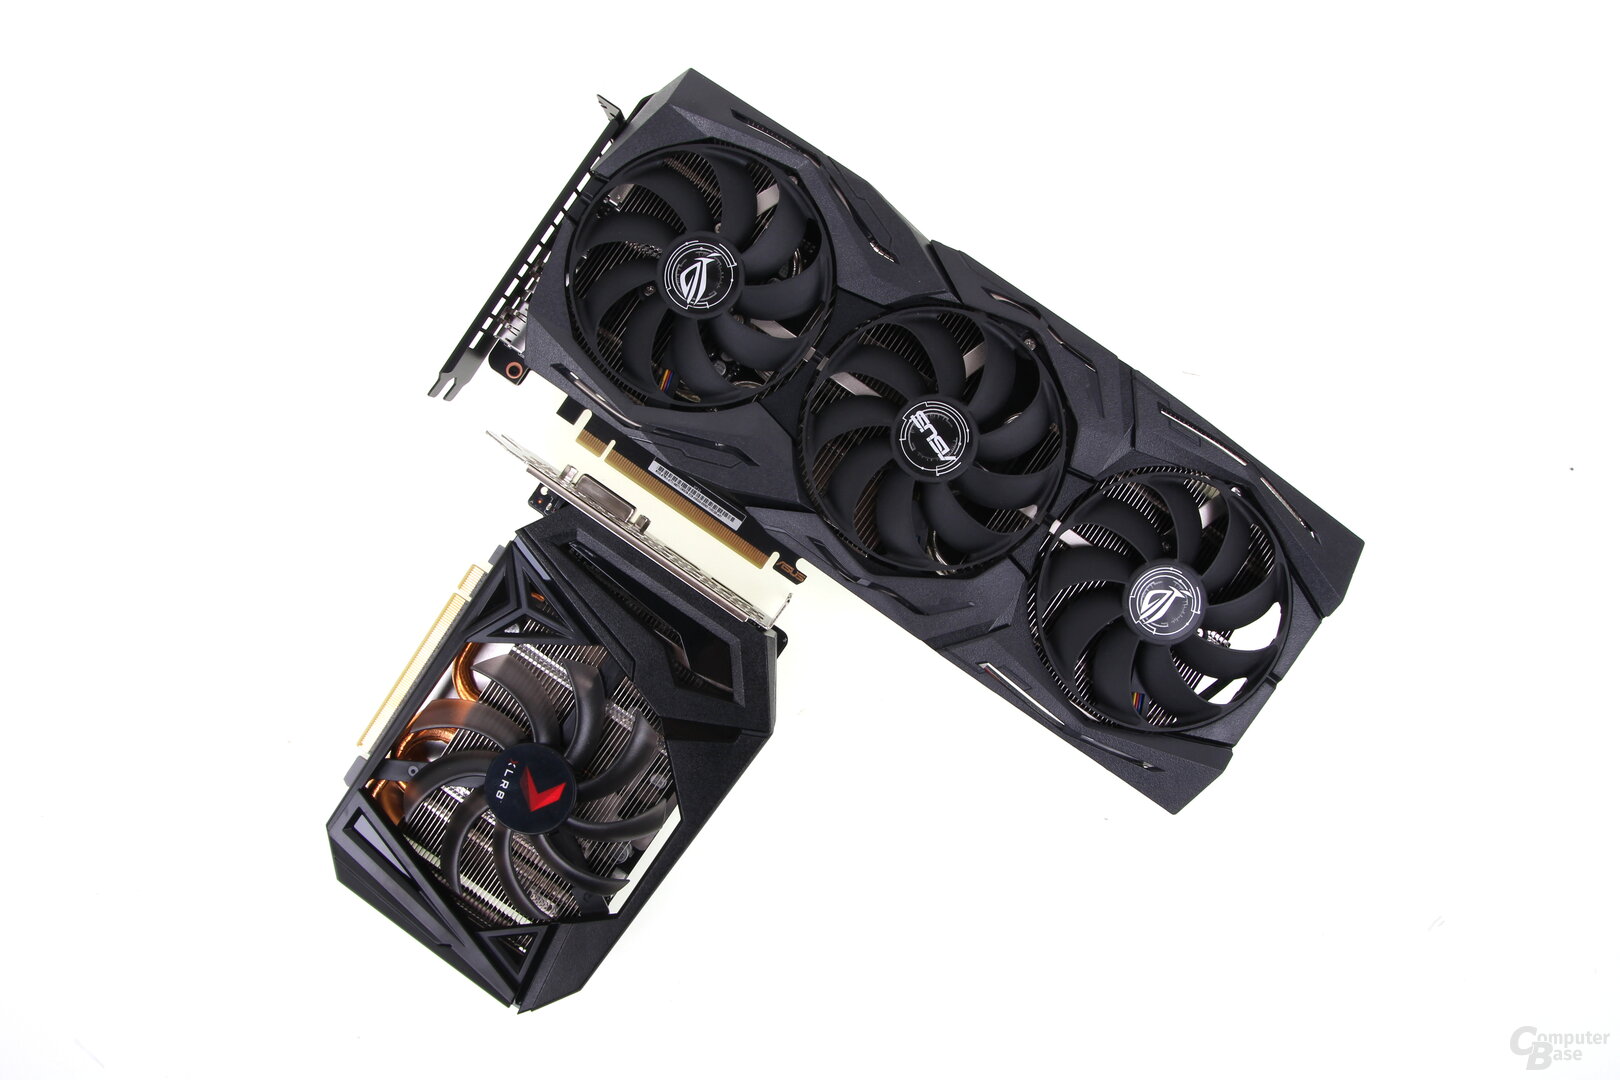 GeForce GTX 1660 Ti in large and small